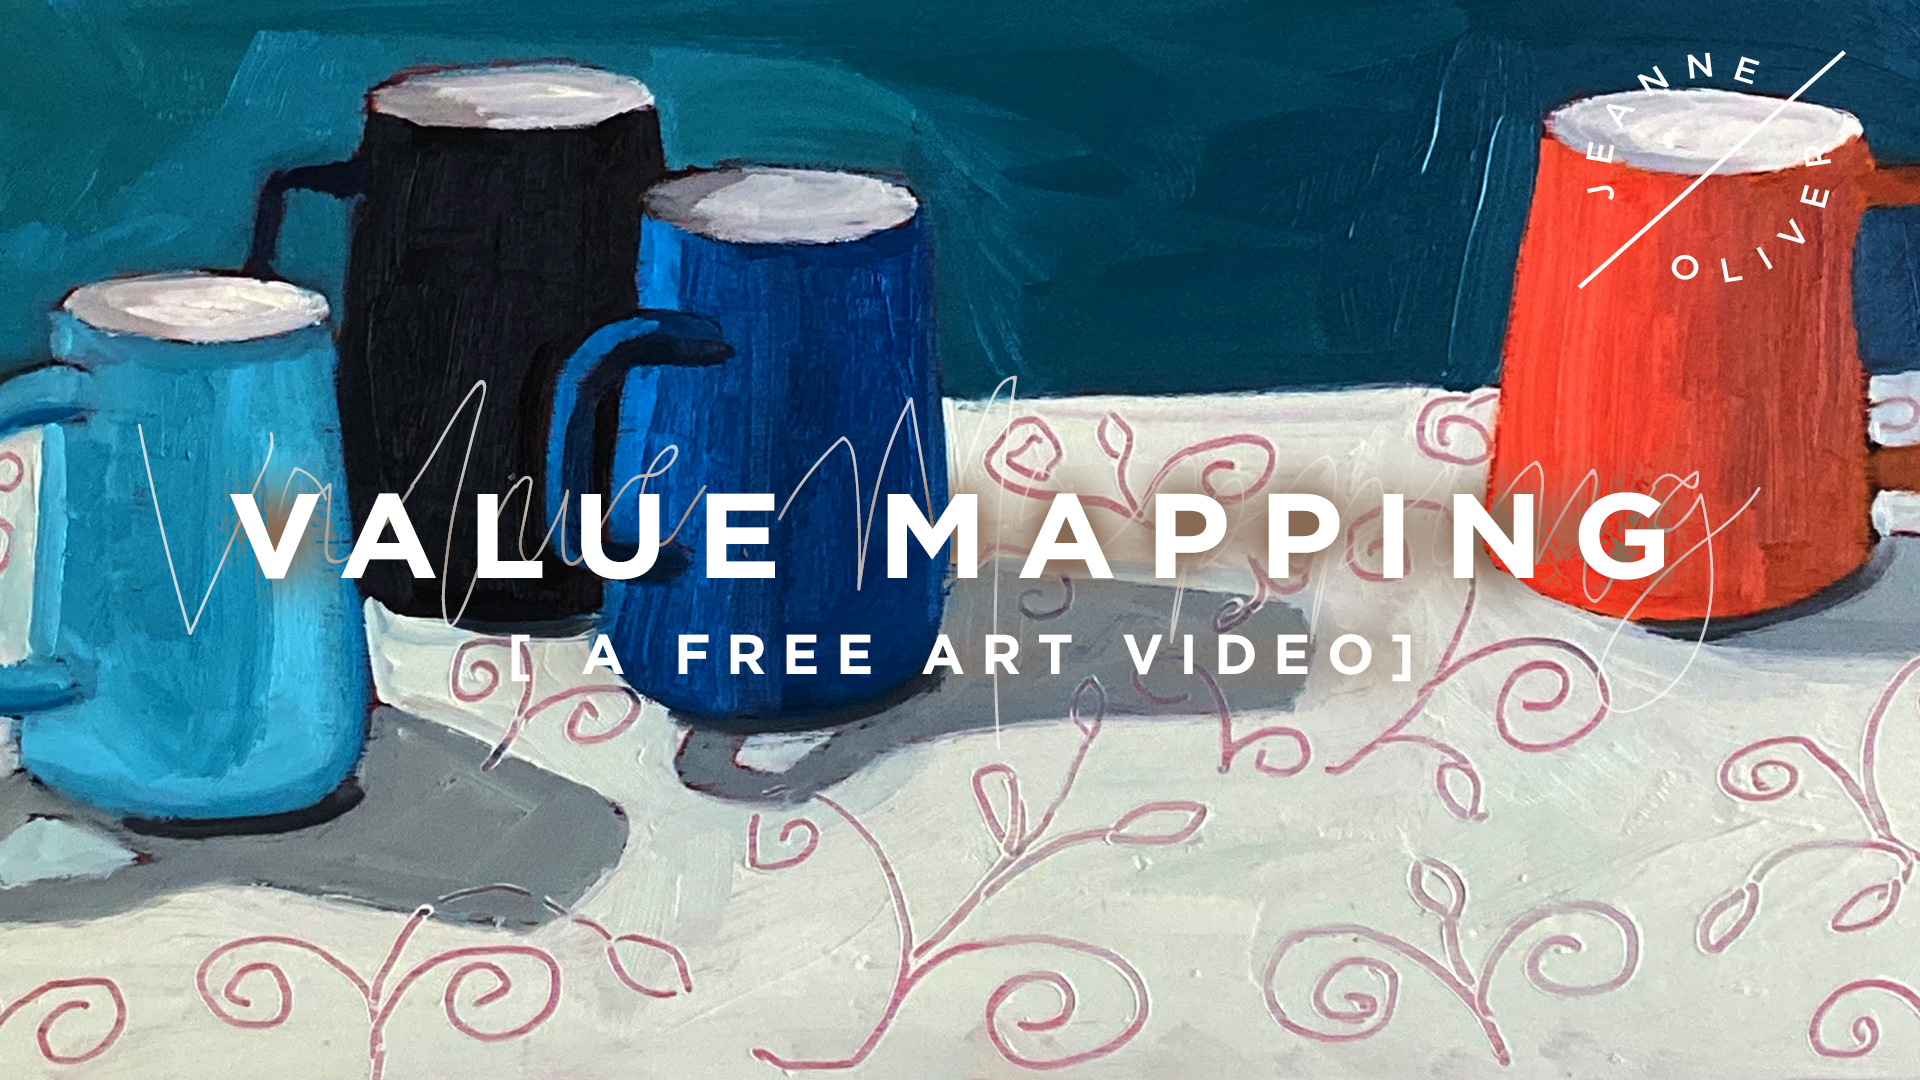 A Free Art Video | Value Mapping with Debbie Miller